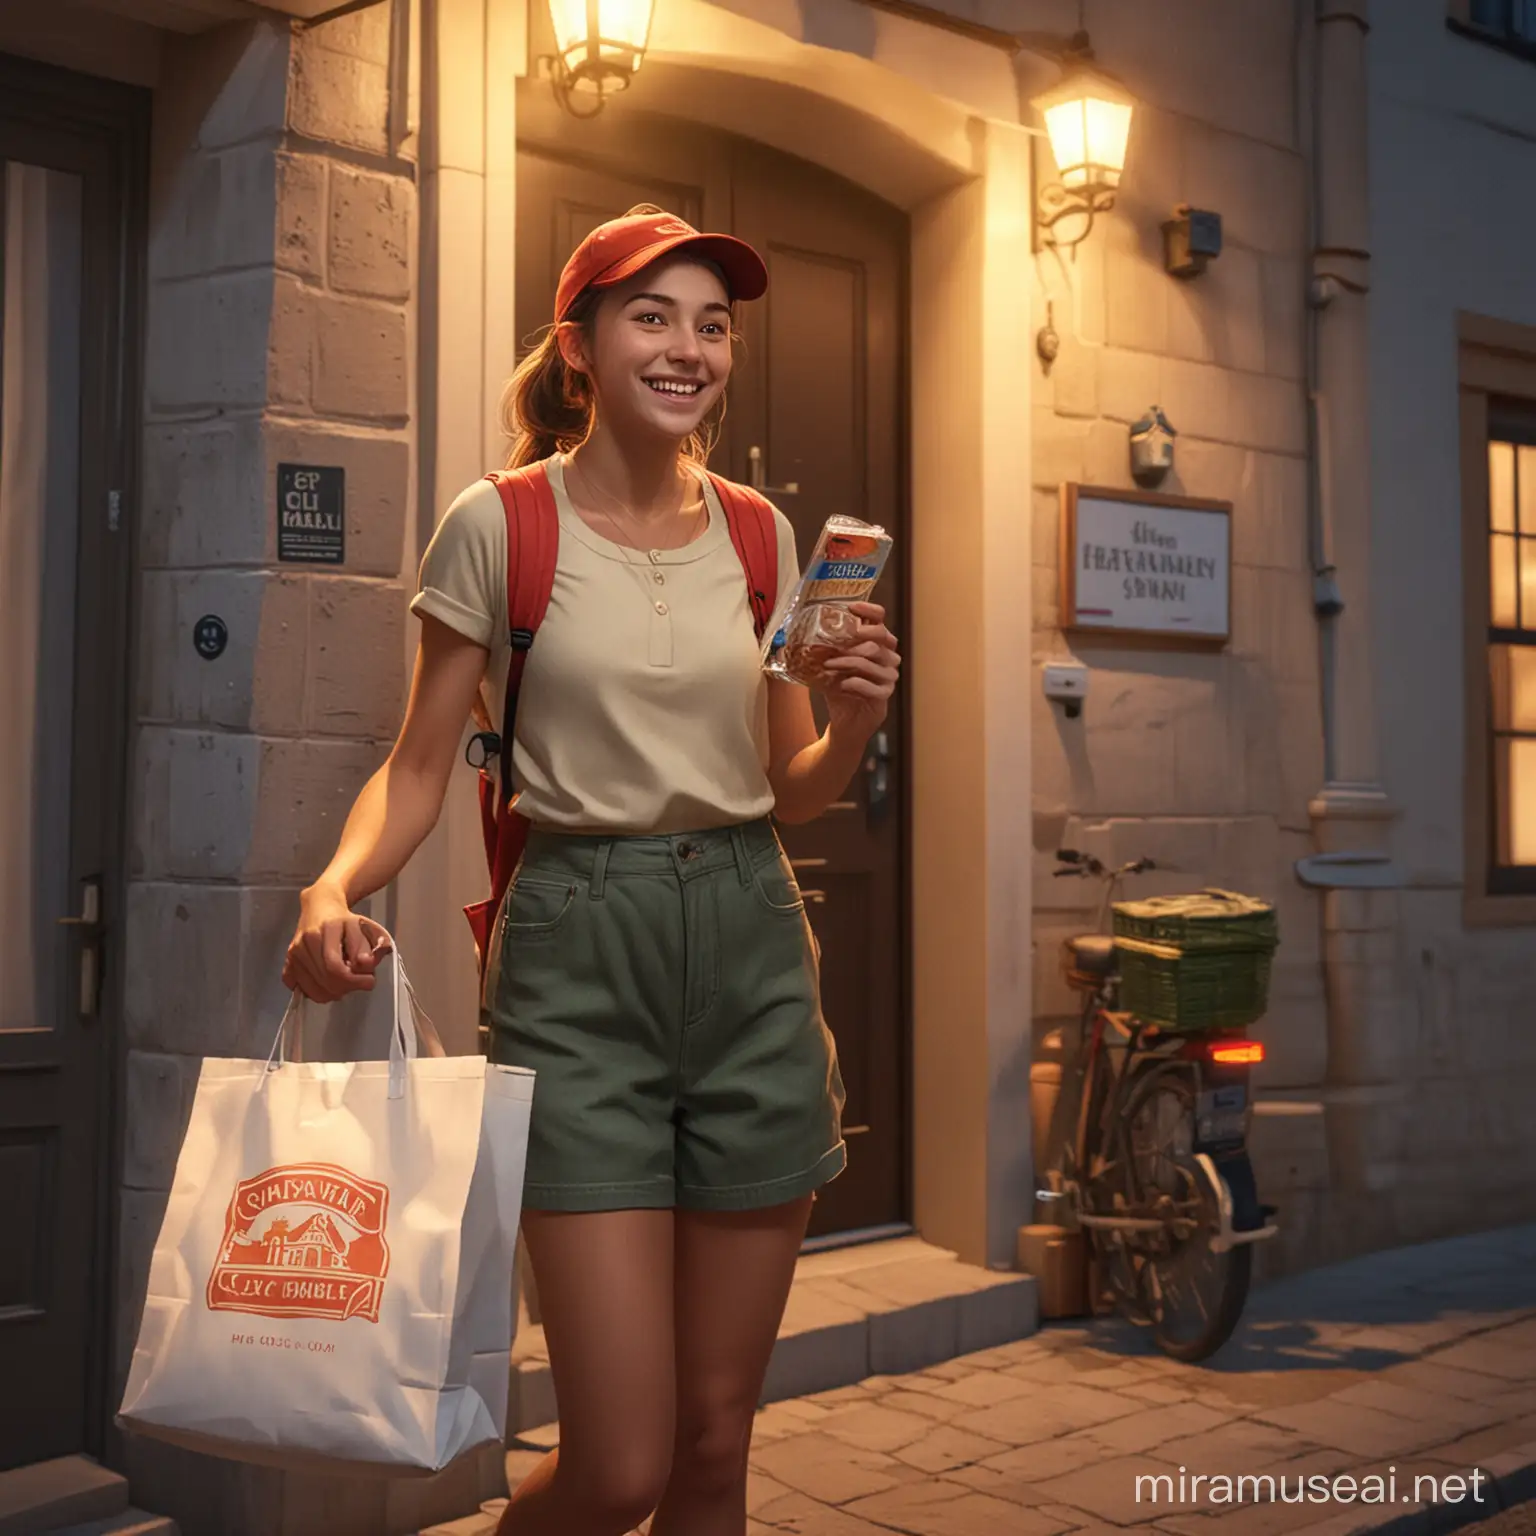 Nighttime Encounter Girl and Food Delivery Driver in Sim City Style